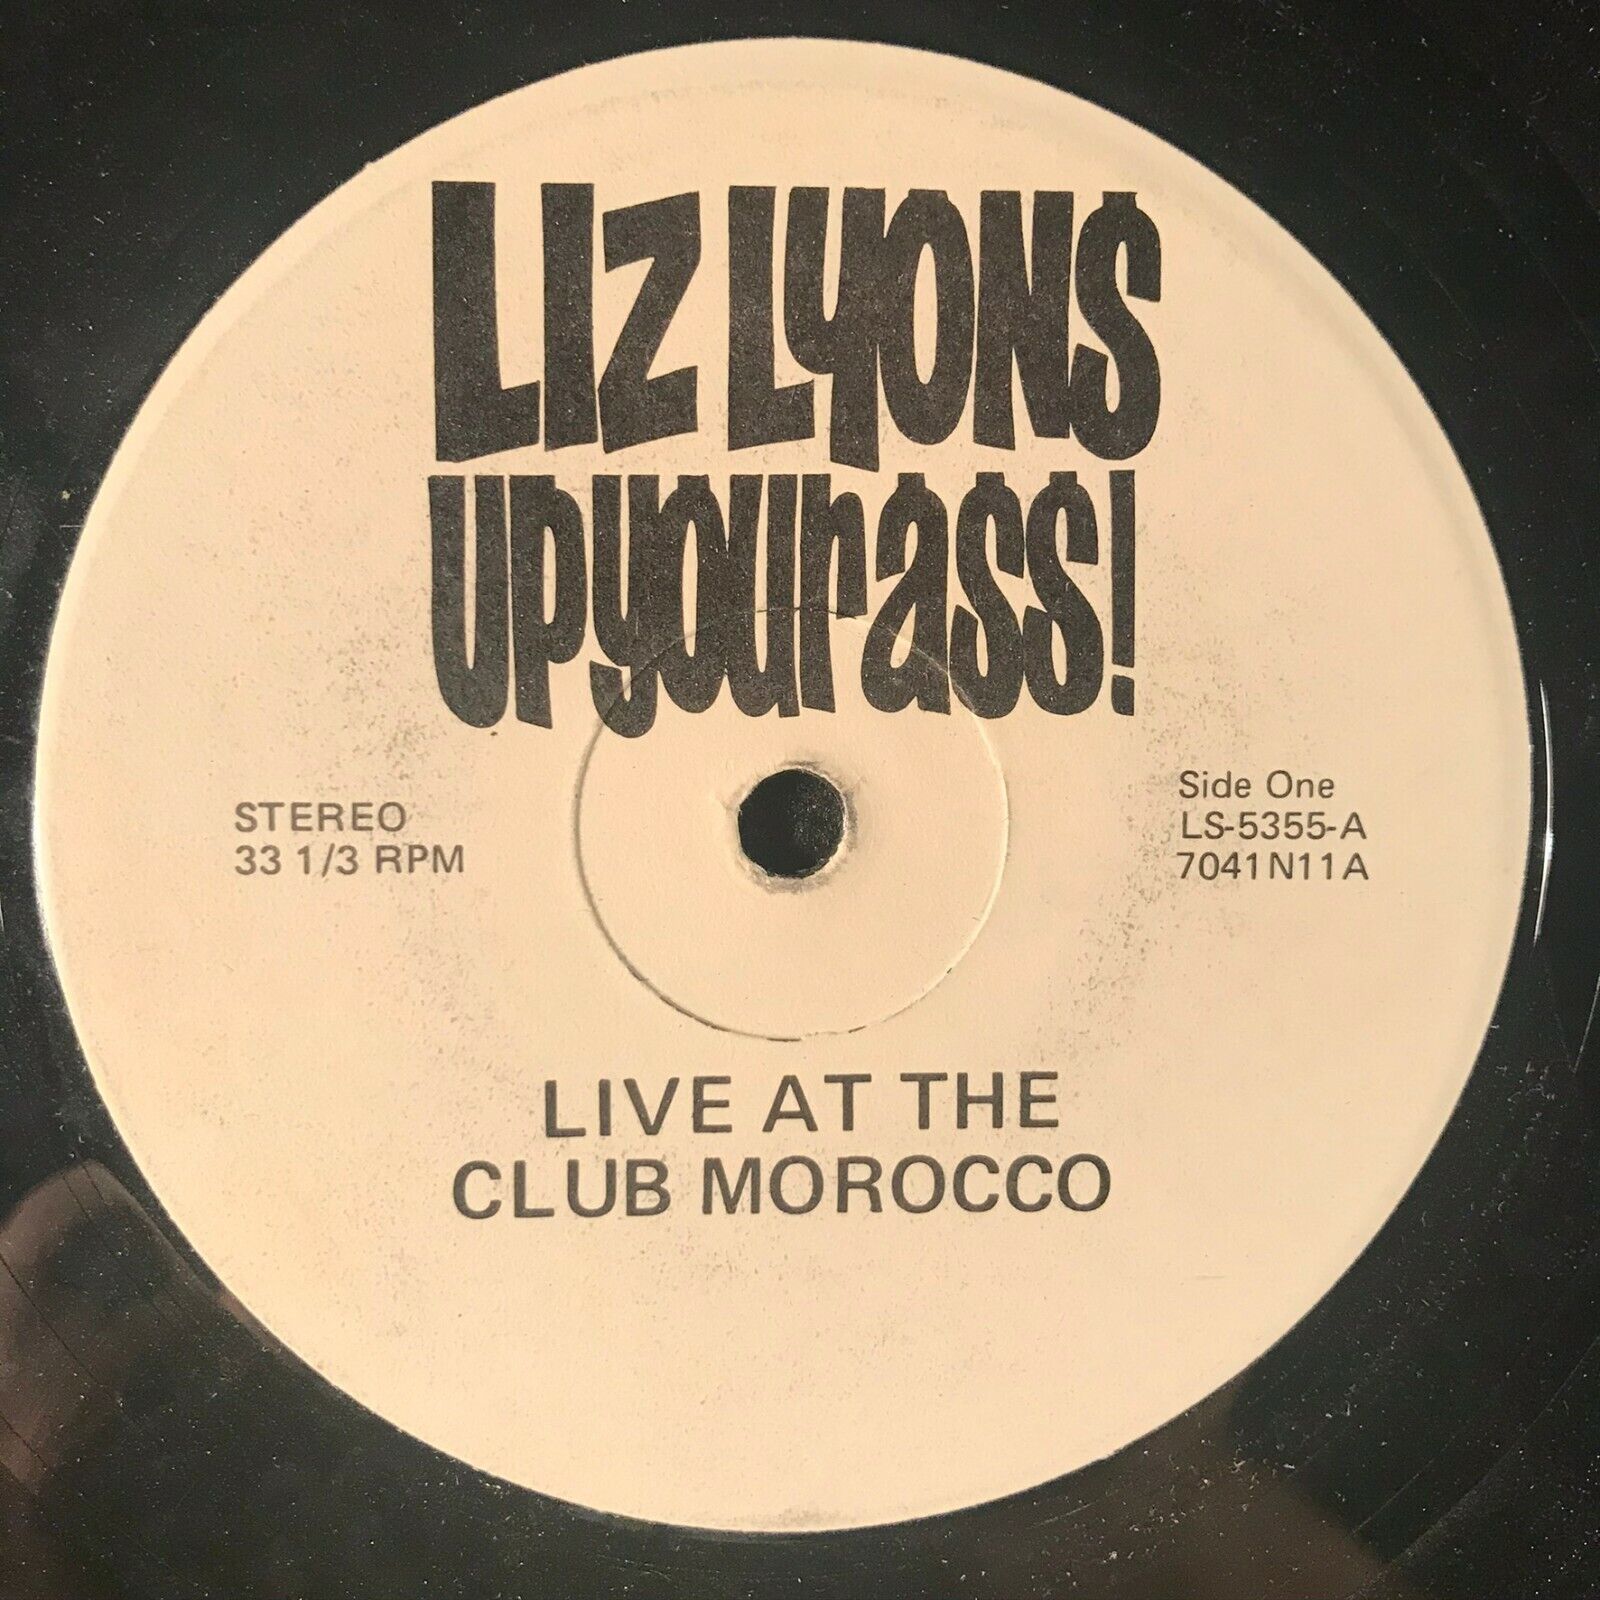 Up Your Ass by Liz Lyons (**no label name** LS-5355) LP EX (no cover) Comedy